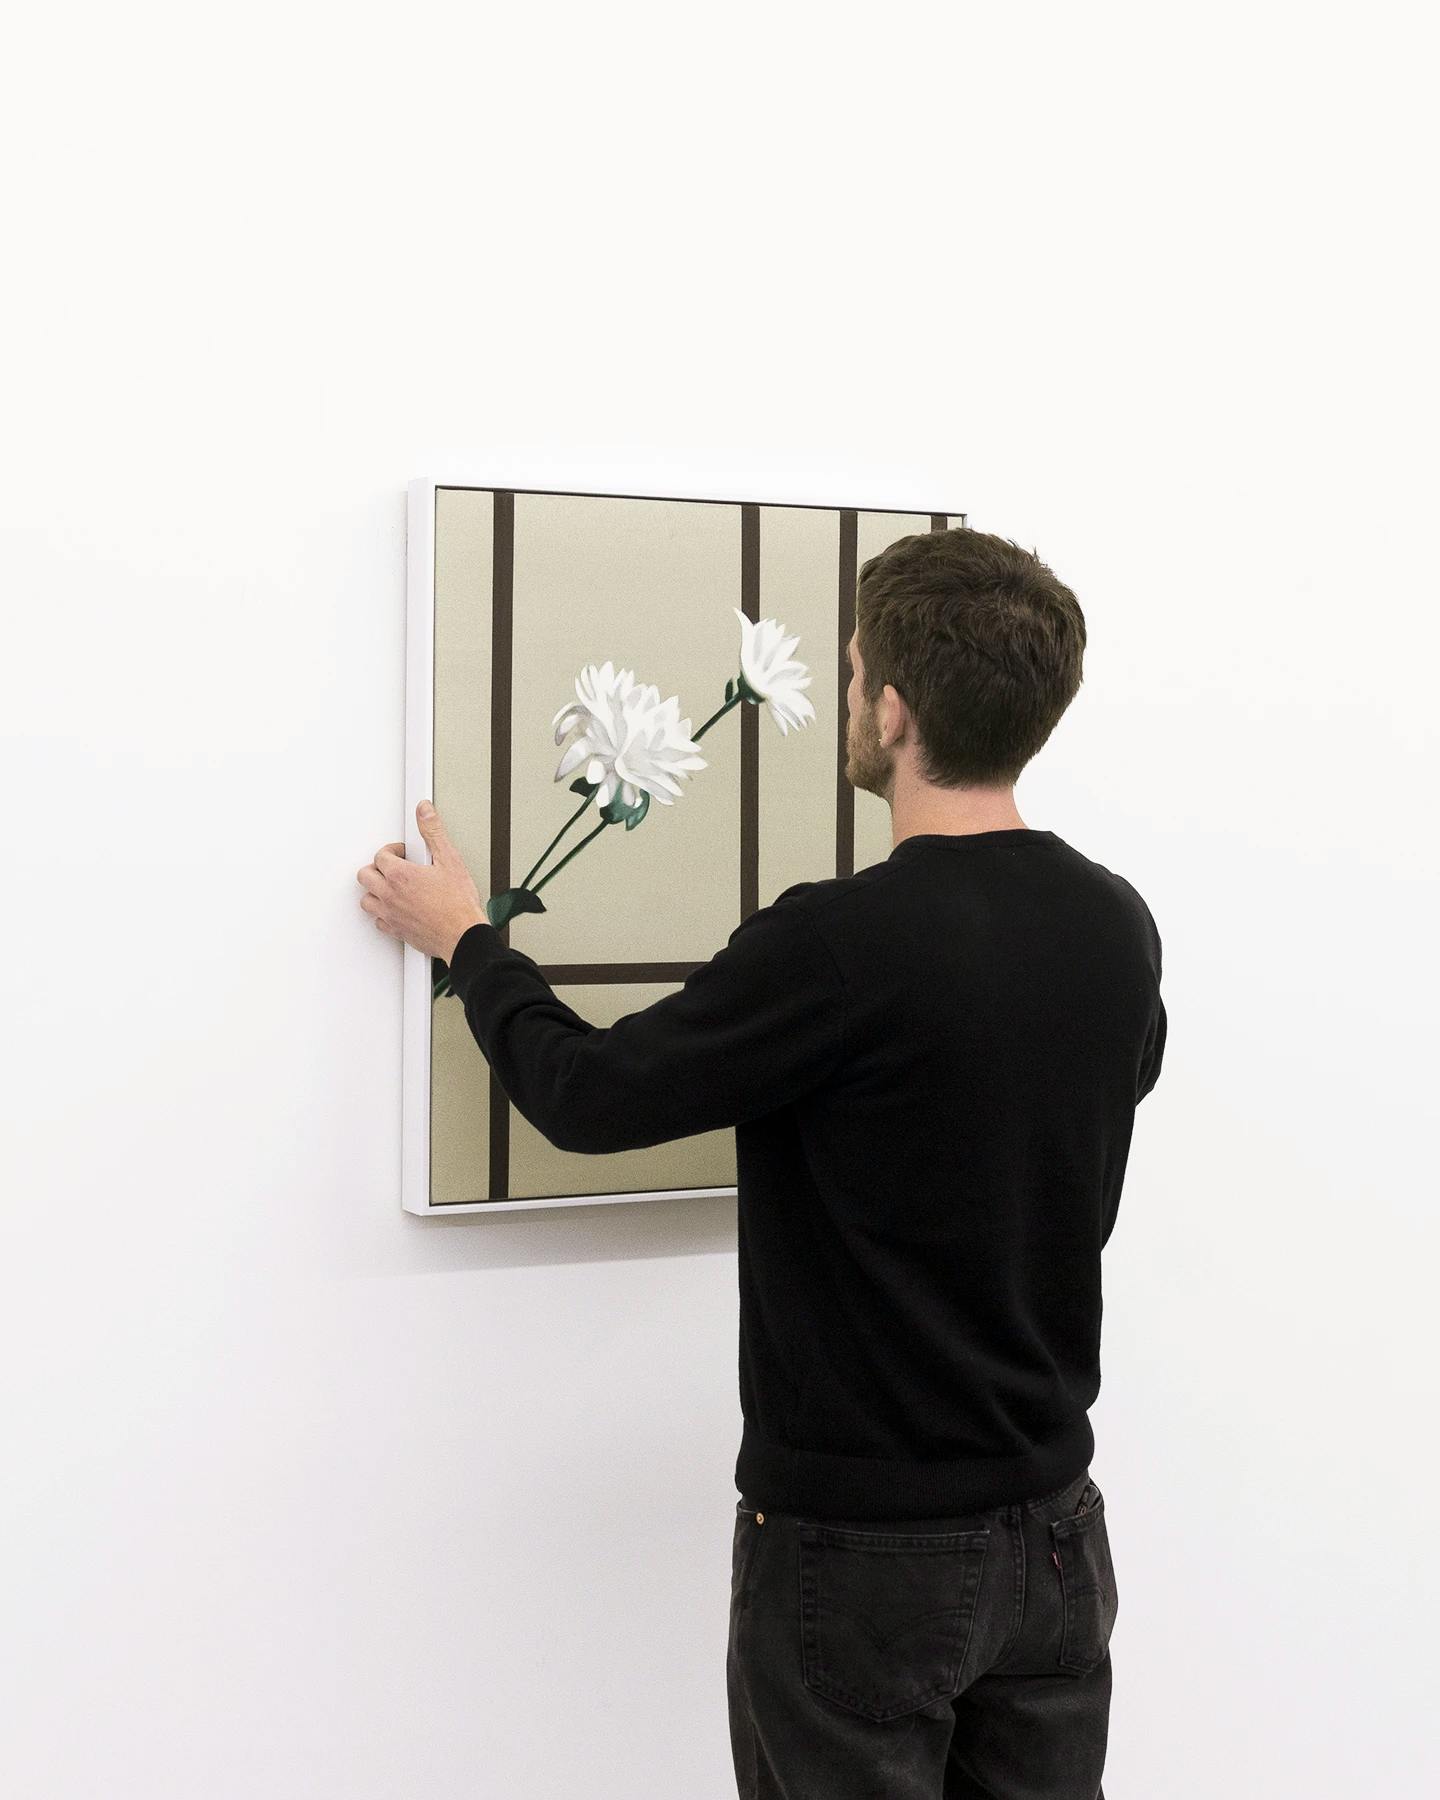 Artist Bryce Anderson wearing a black long-sleeve shirt and holding up his painting with a white flower against a white wall.